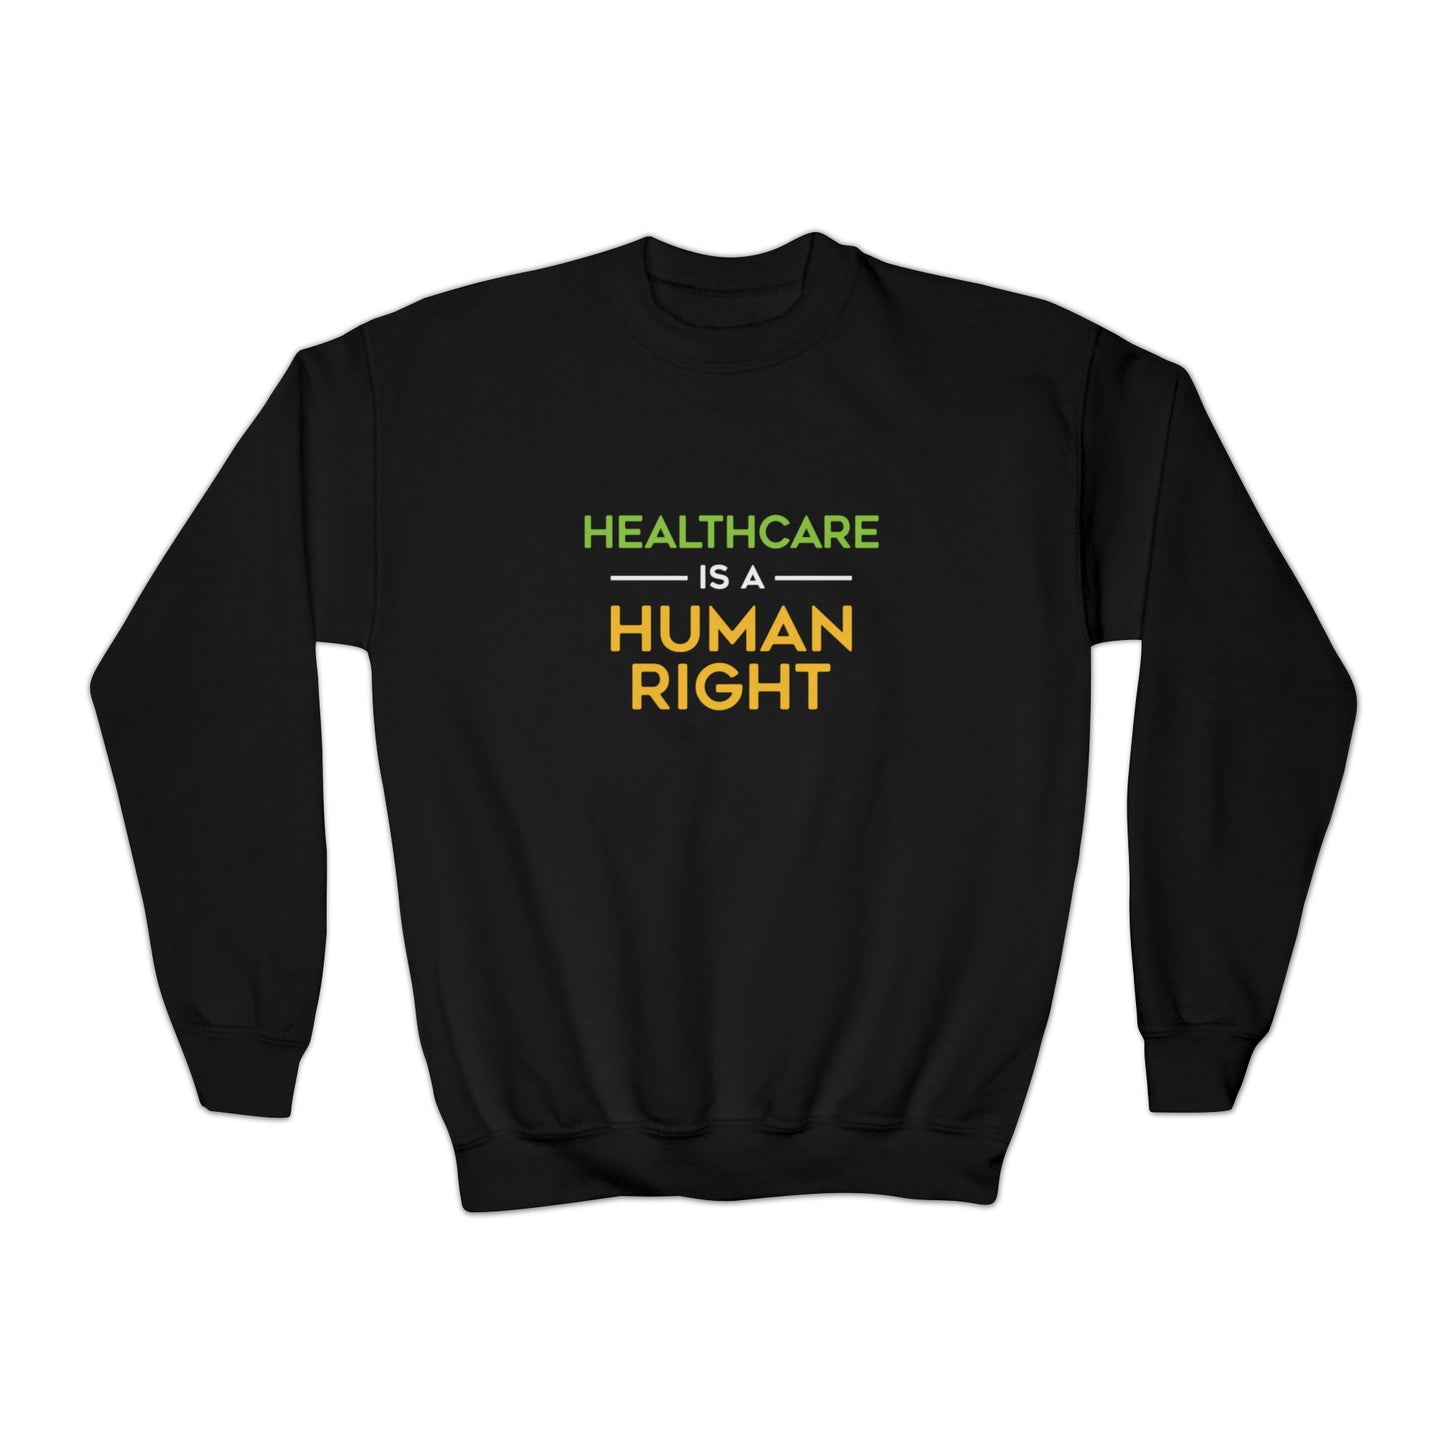 “Healthcare Is A Human Right” Youth Sweatshirt